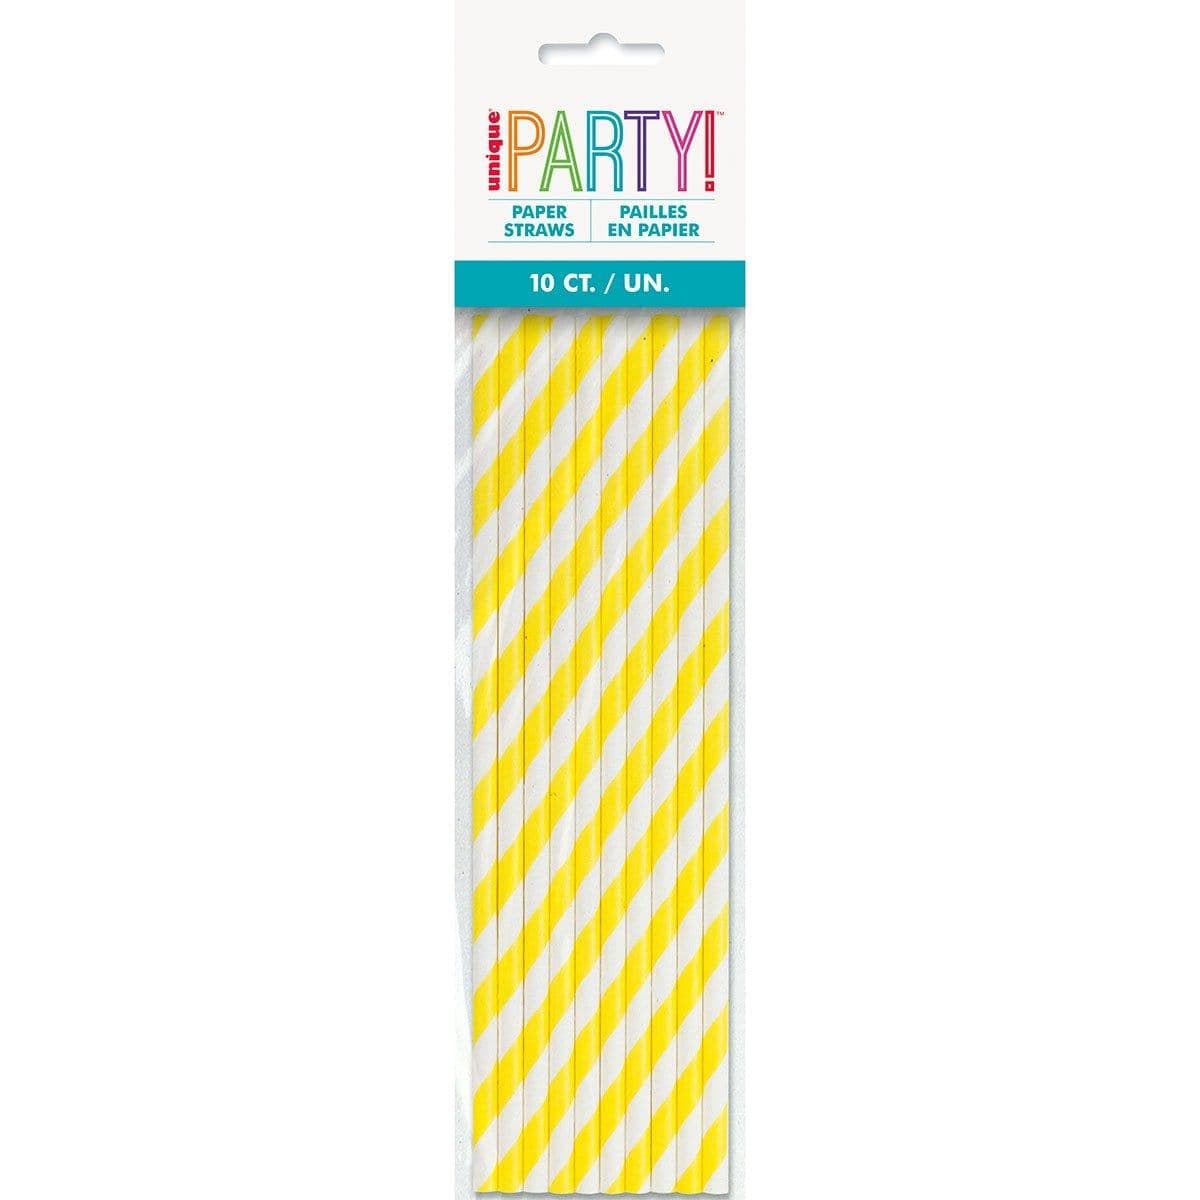 Buy Plasticware Paper Straw With Yellow Stripe, 10 Count sold at Party Expert